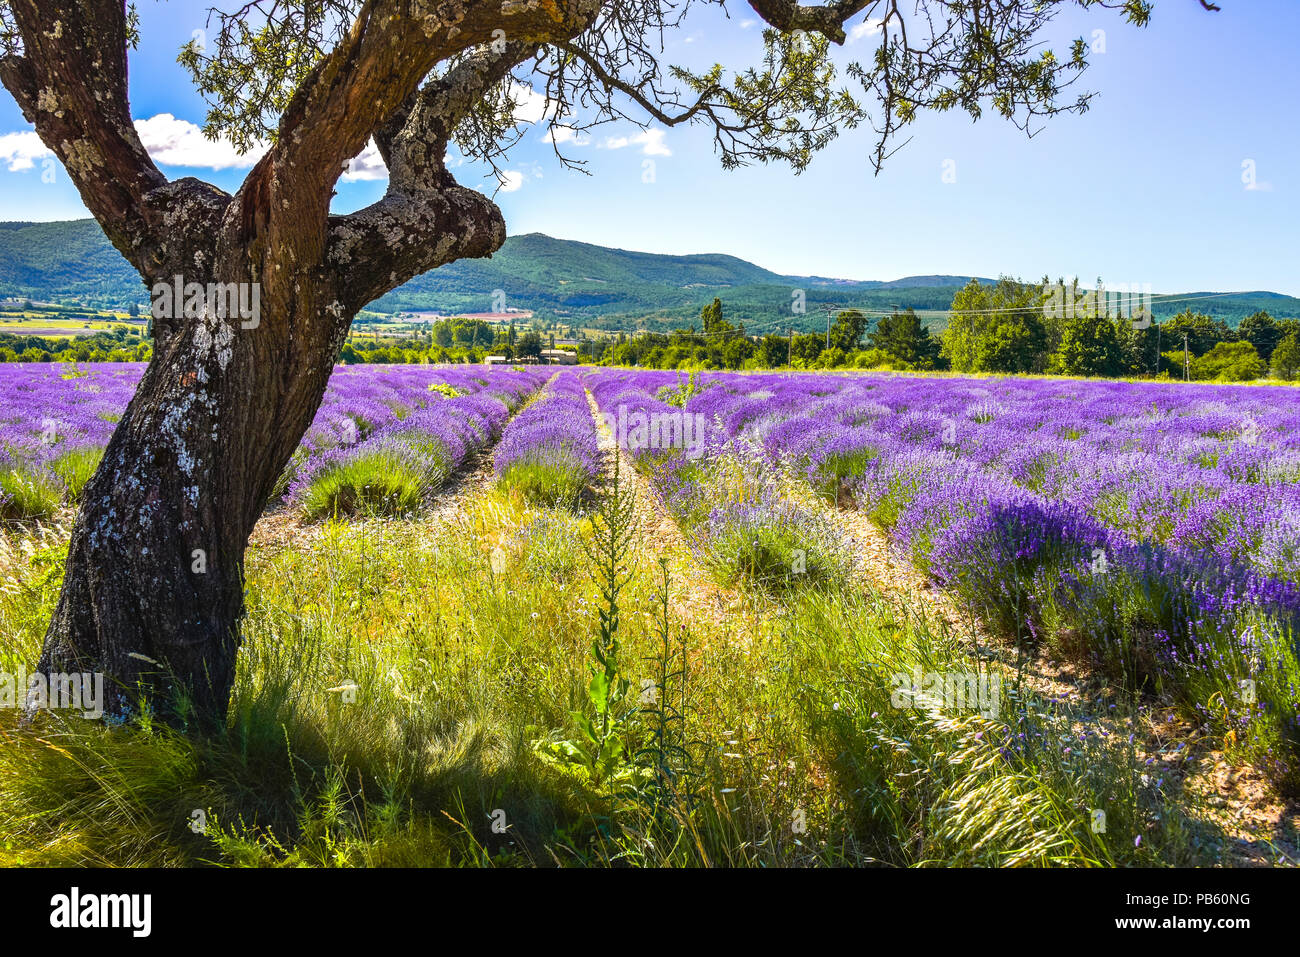 lavender field of a farm, near Sault, Provence, France, skew grown shady tree in foreground, department Vaucluse, region Provence-Alpes-Côte d'Azur Stock Photo